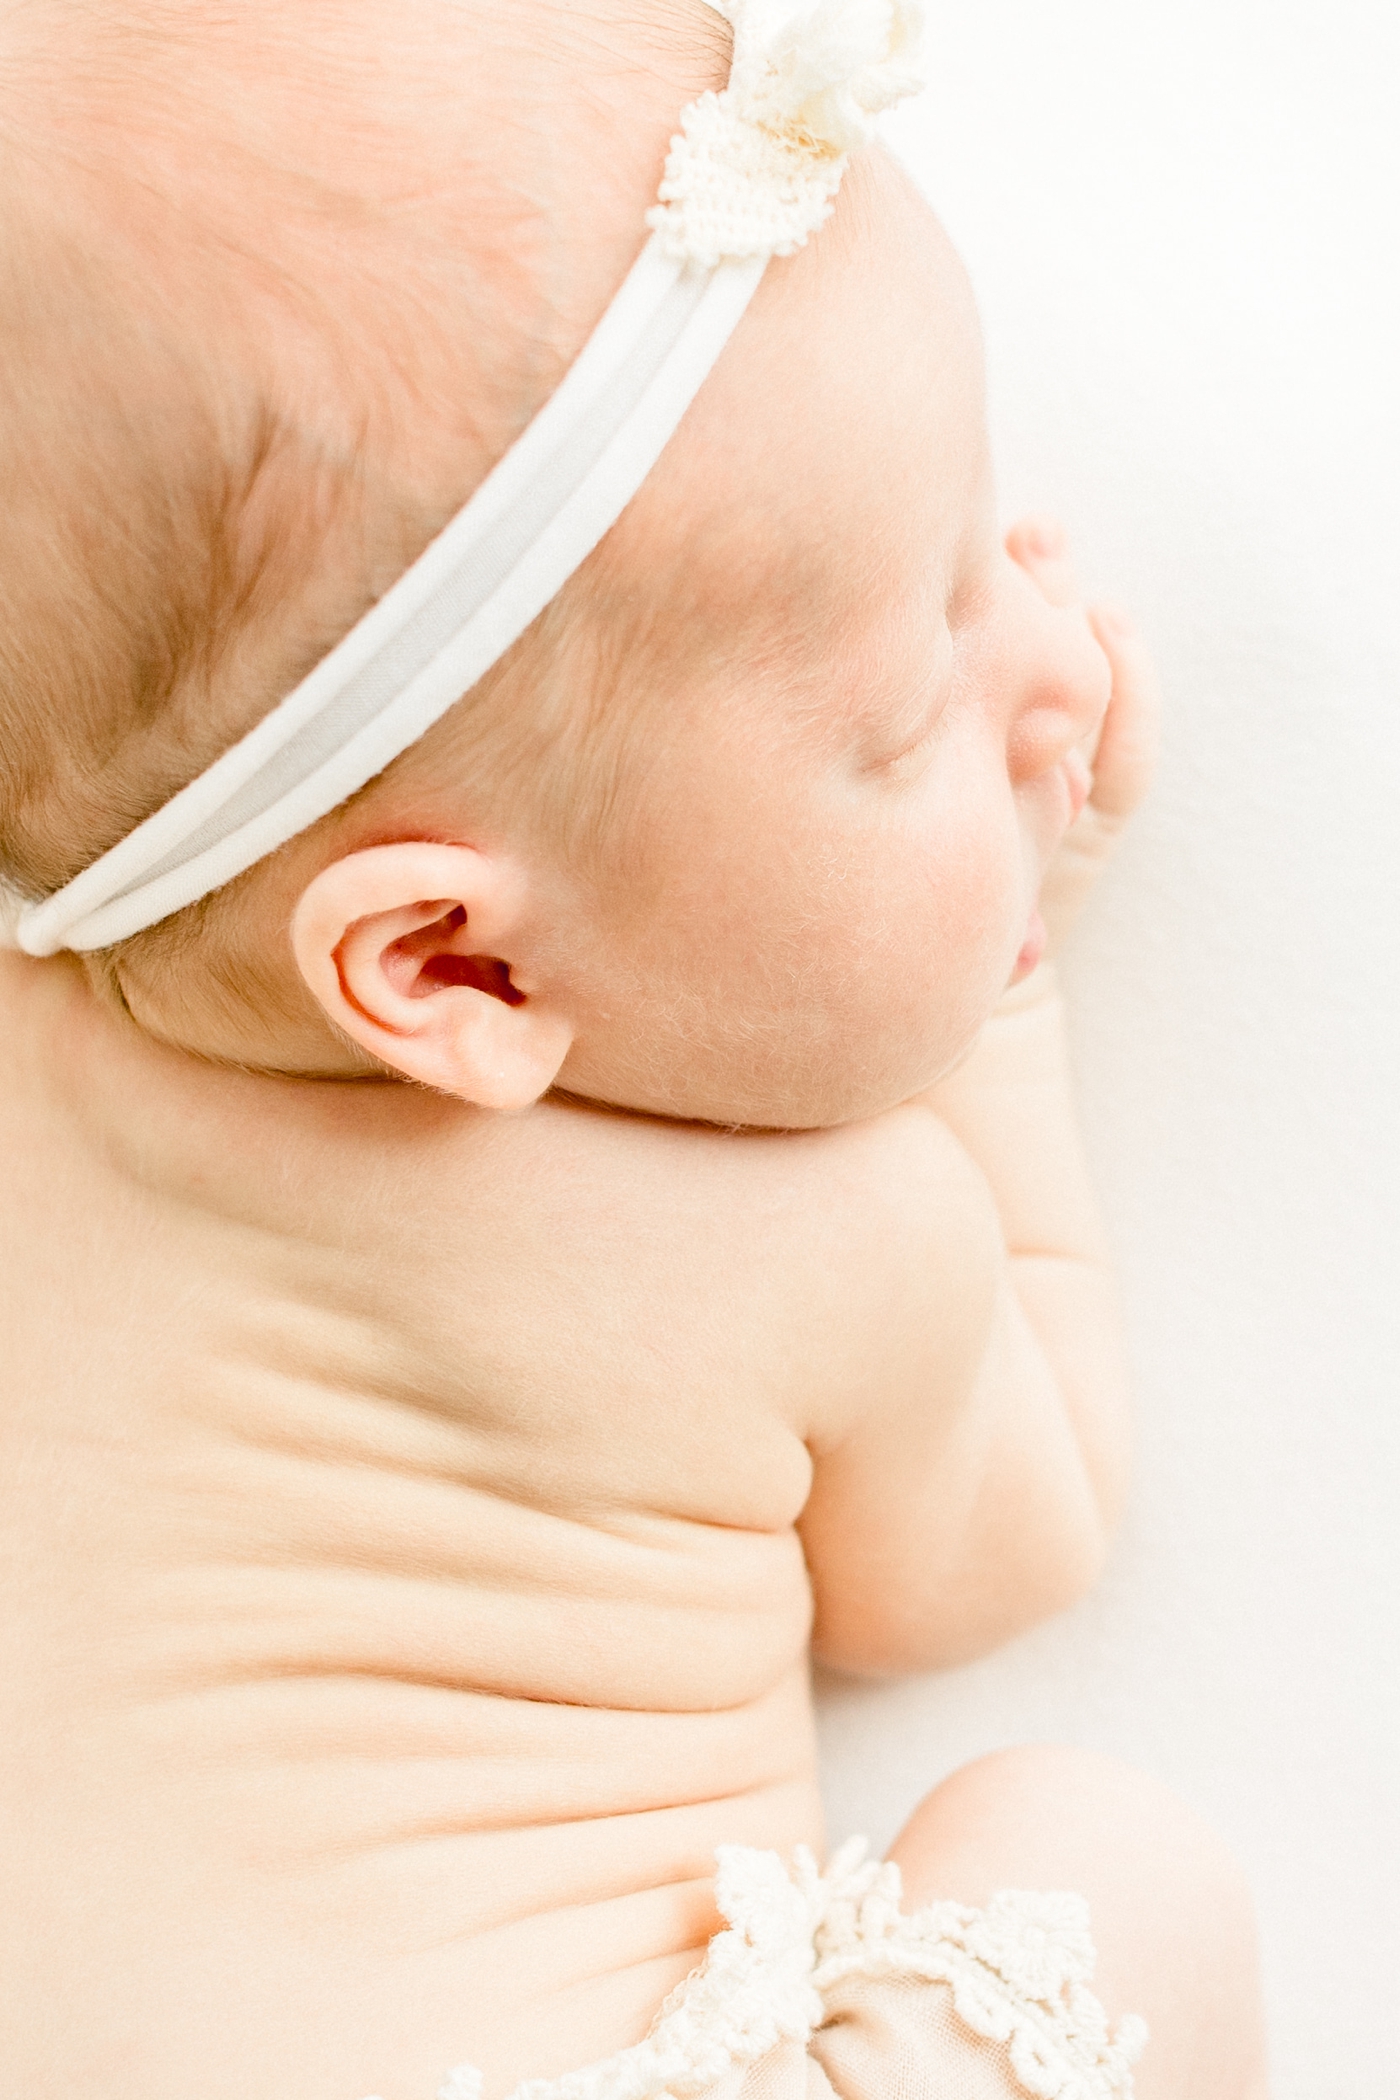 Detail image of baby's rolls and little ears during studio newborn session. Photo by Sana Ahmed Photography.